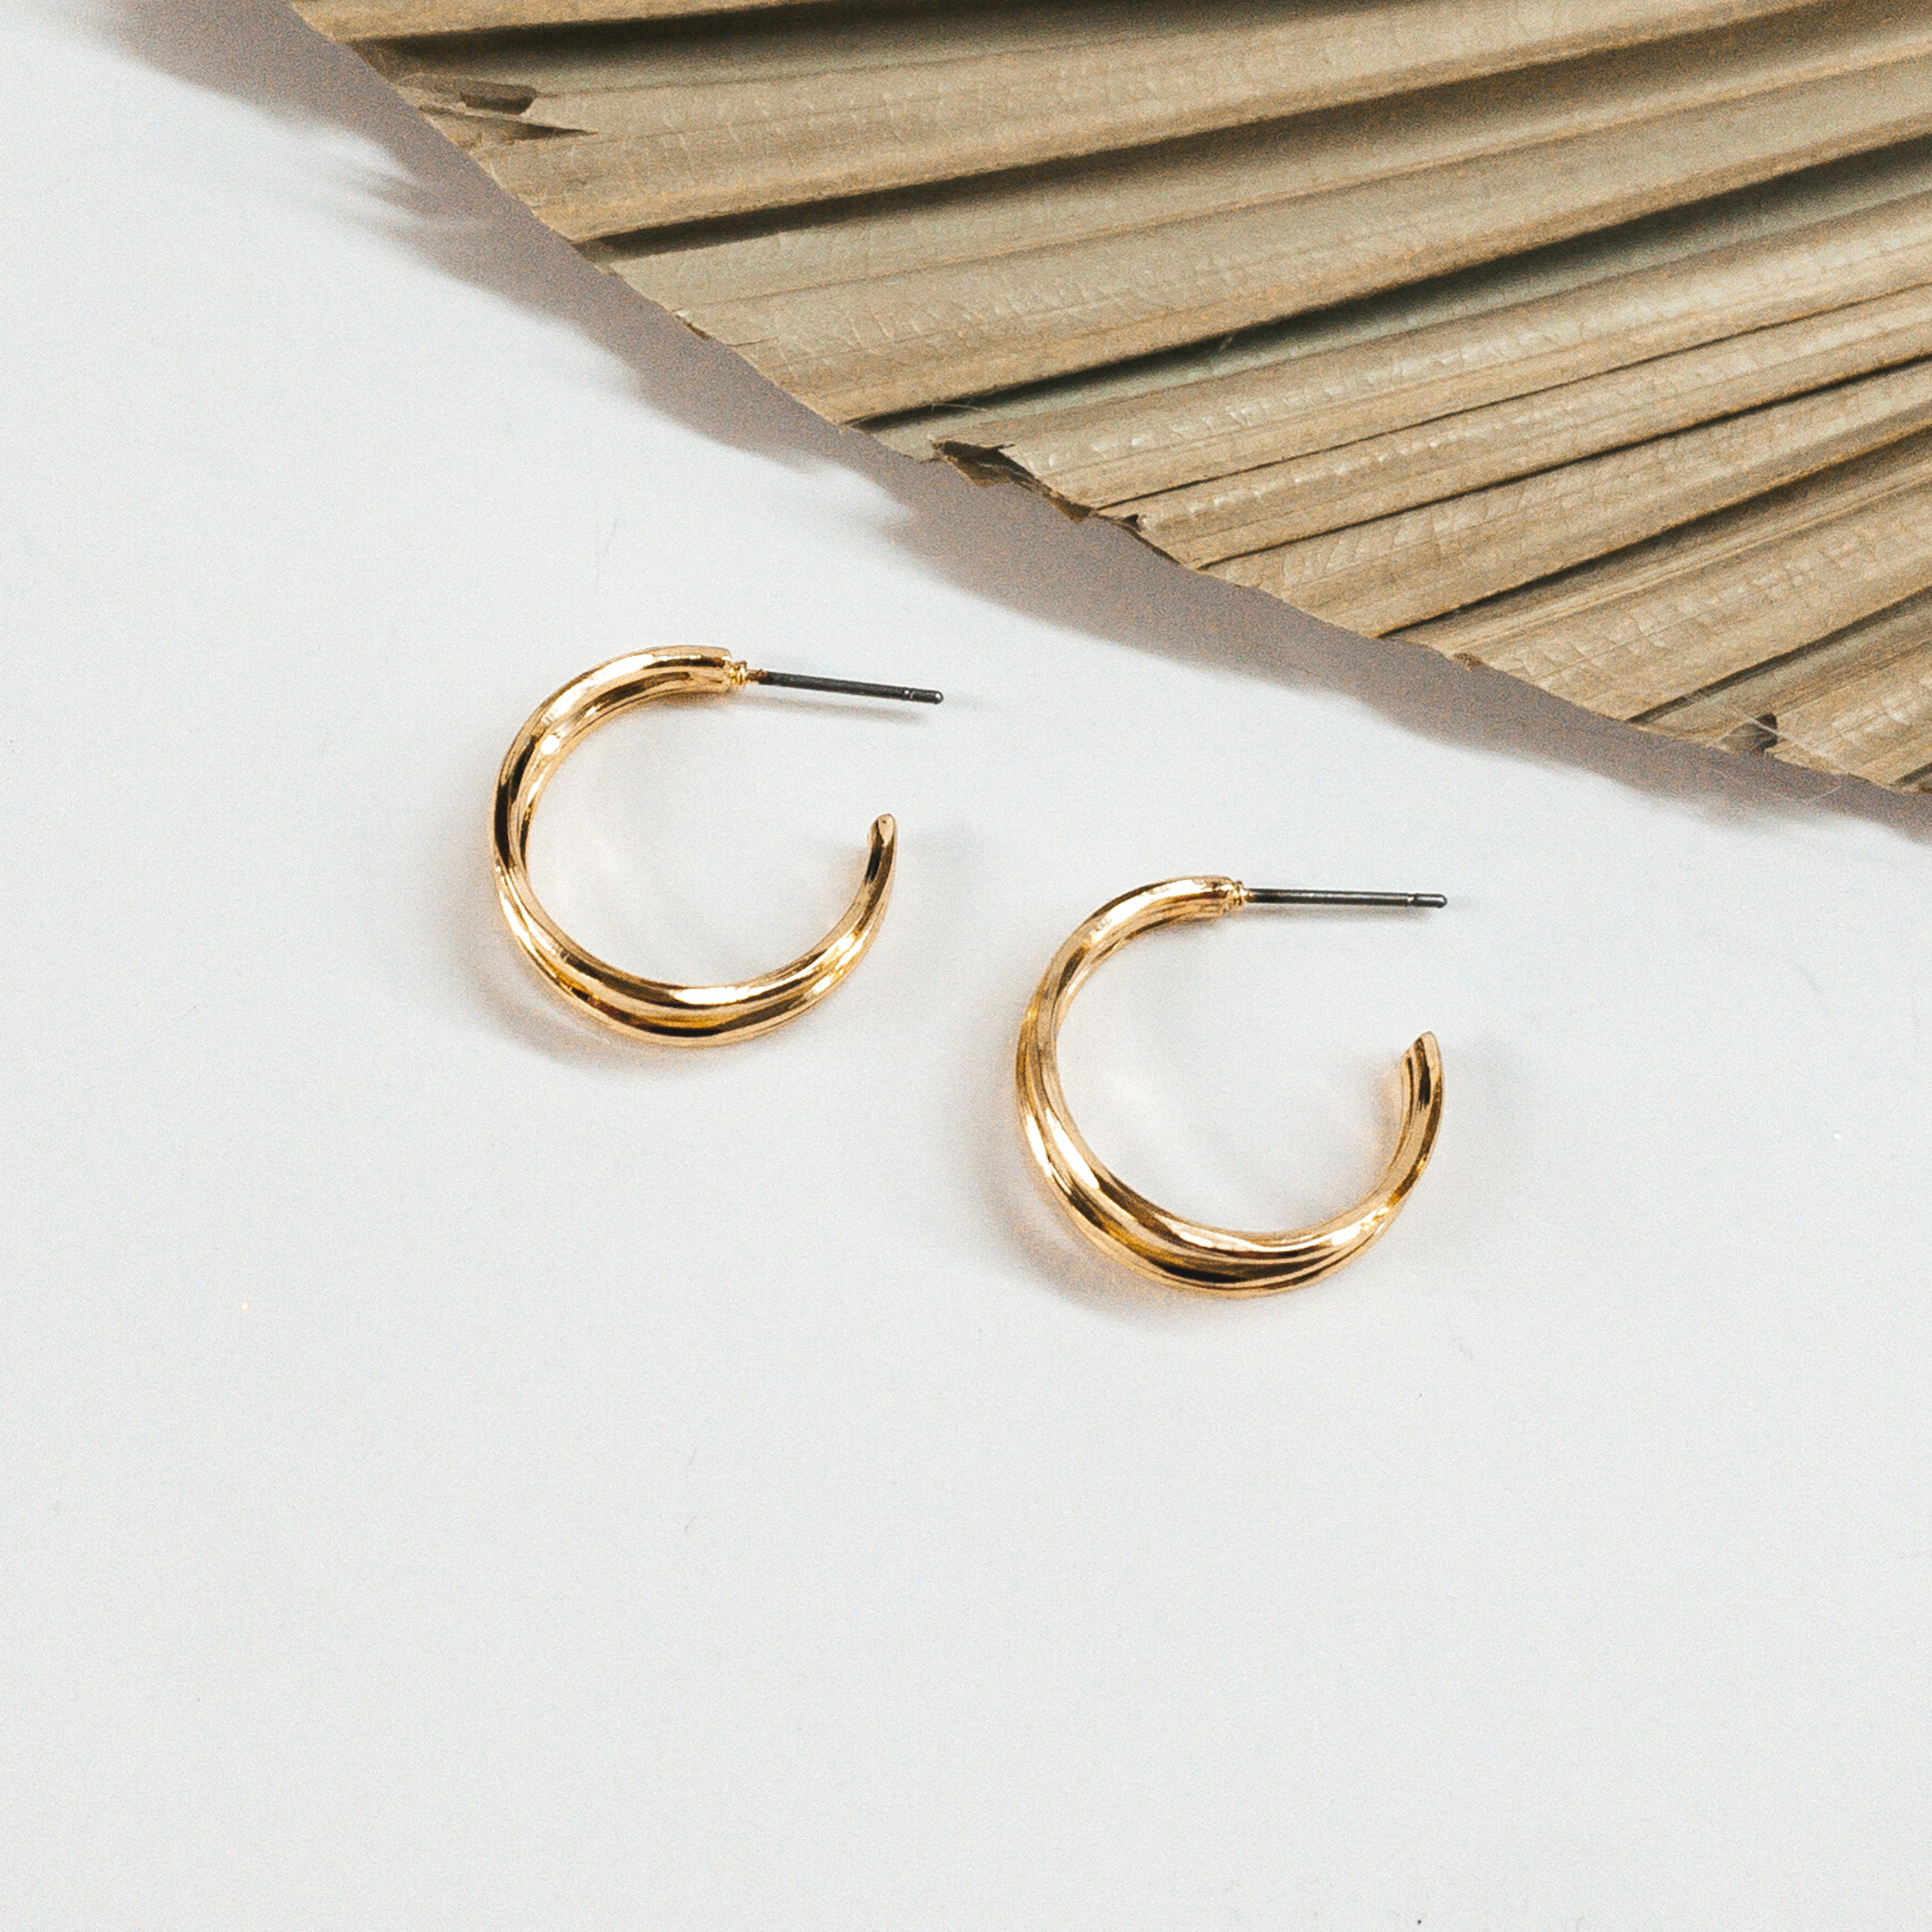 Good Karma Triple Hoop Earrings in Gold Tone - Giddy Up Glamour Boutique